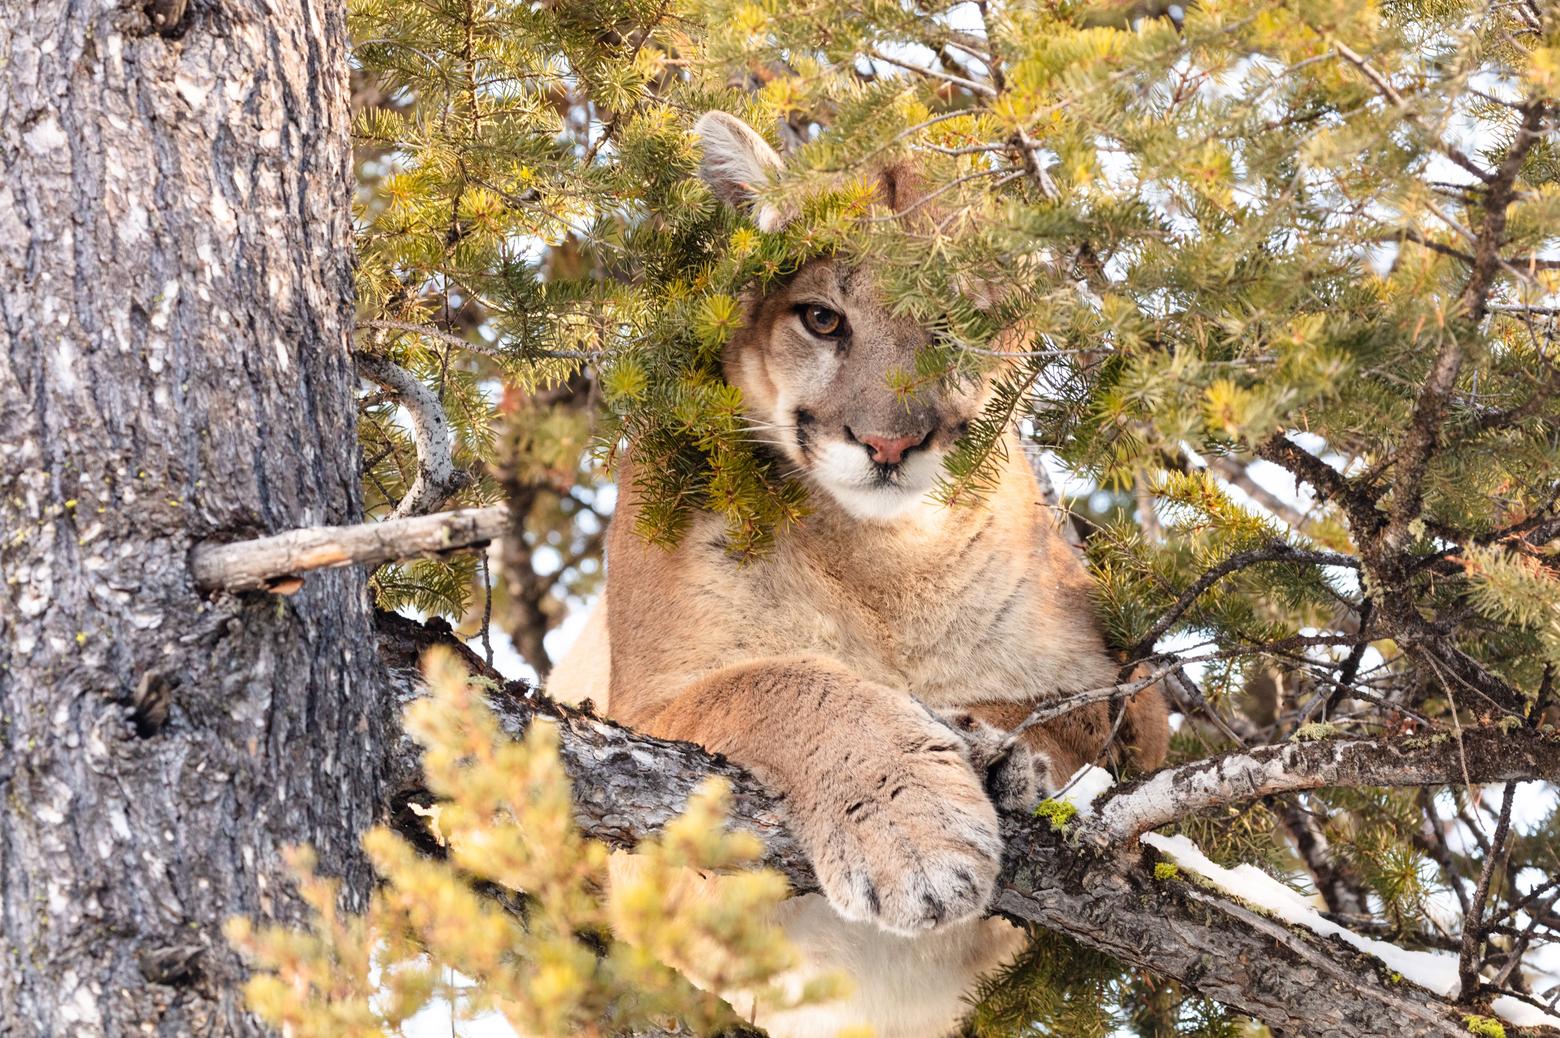 One of the lions that is part of a wildlife research project headed by Yellowstone biologist Dan Stahler. Yellowstone's scientific studies of lions, wolves and grizzly bears are world-rewnoned. Photo by Jacob W. Frank/NPS